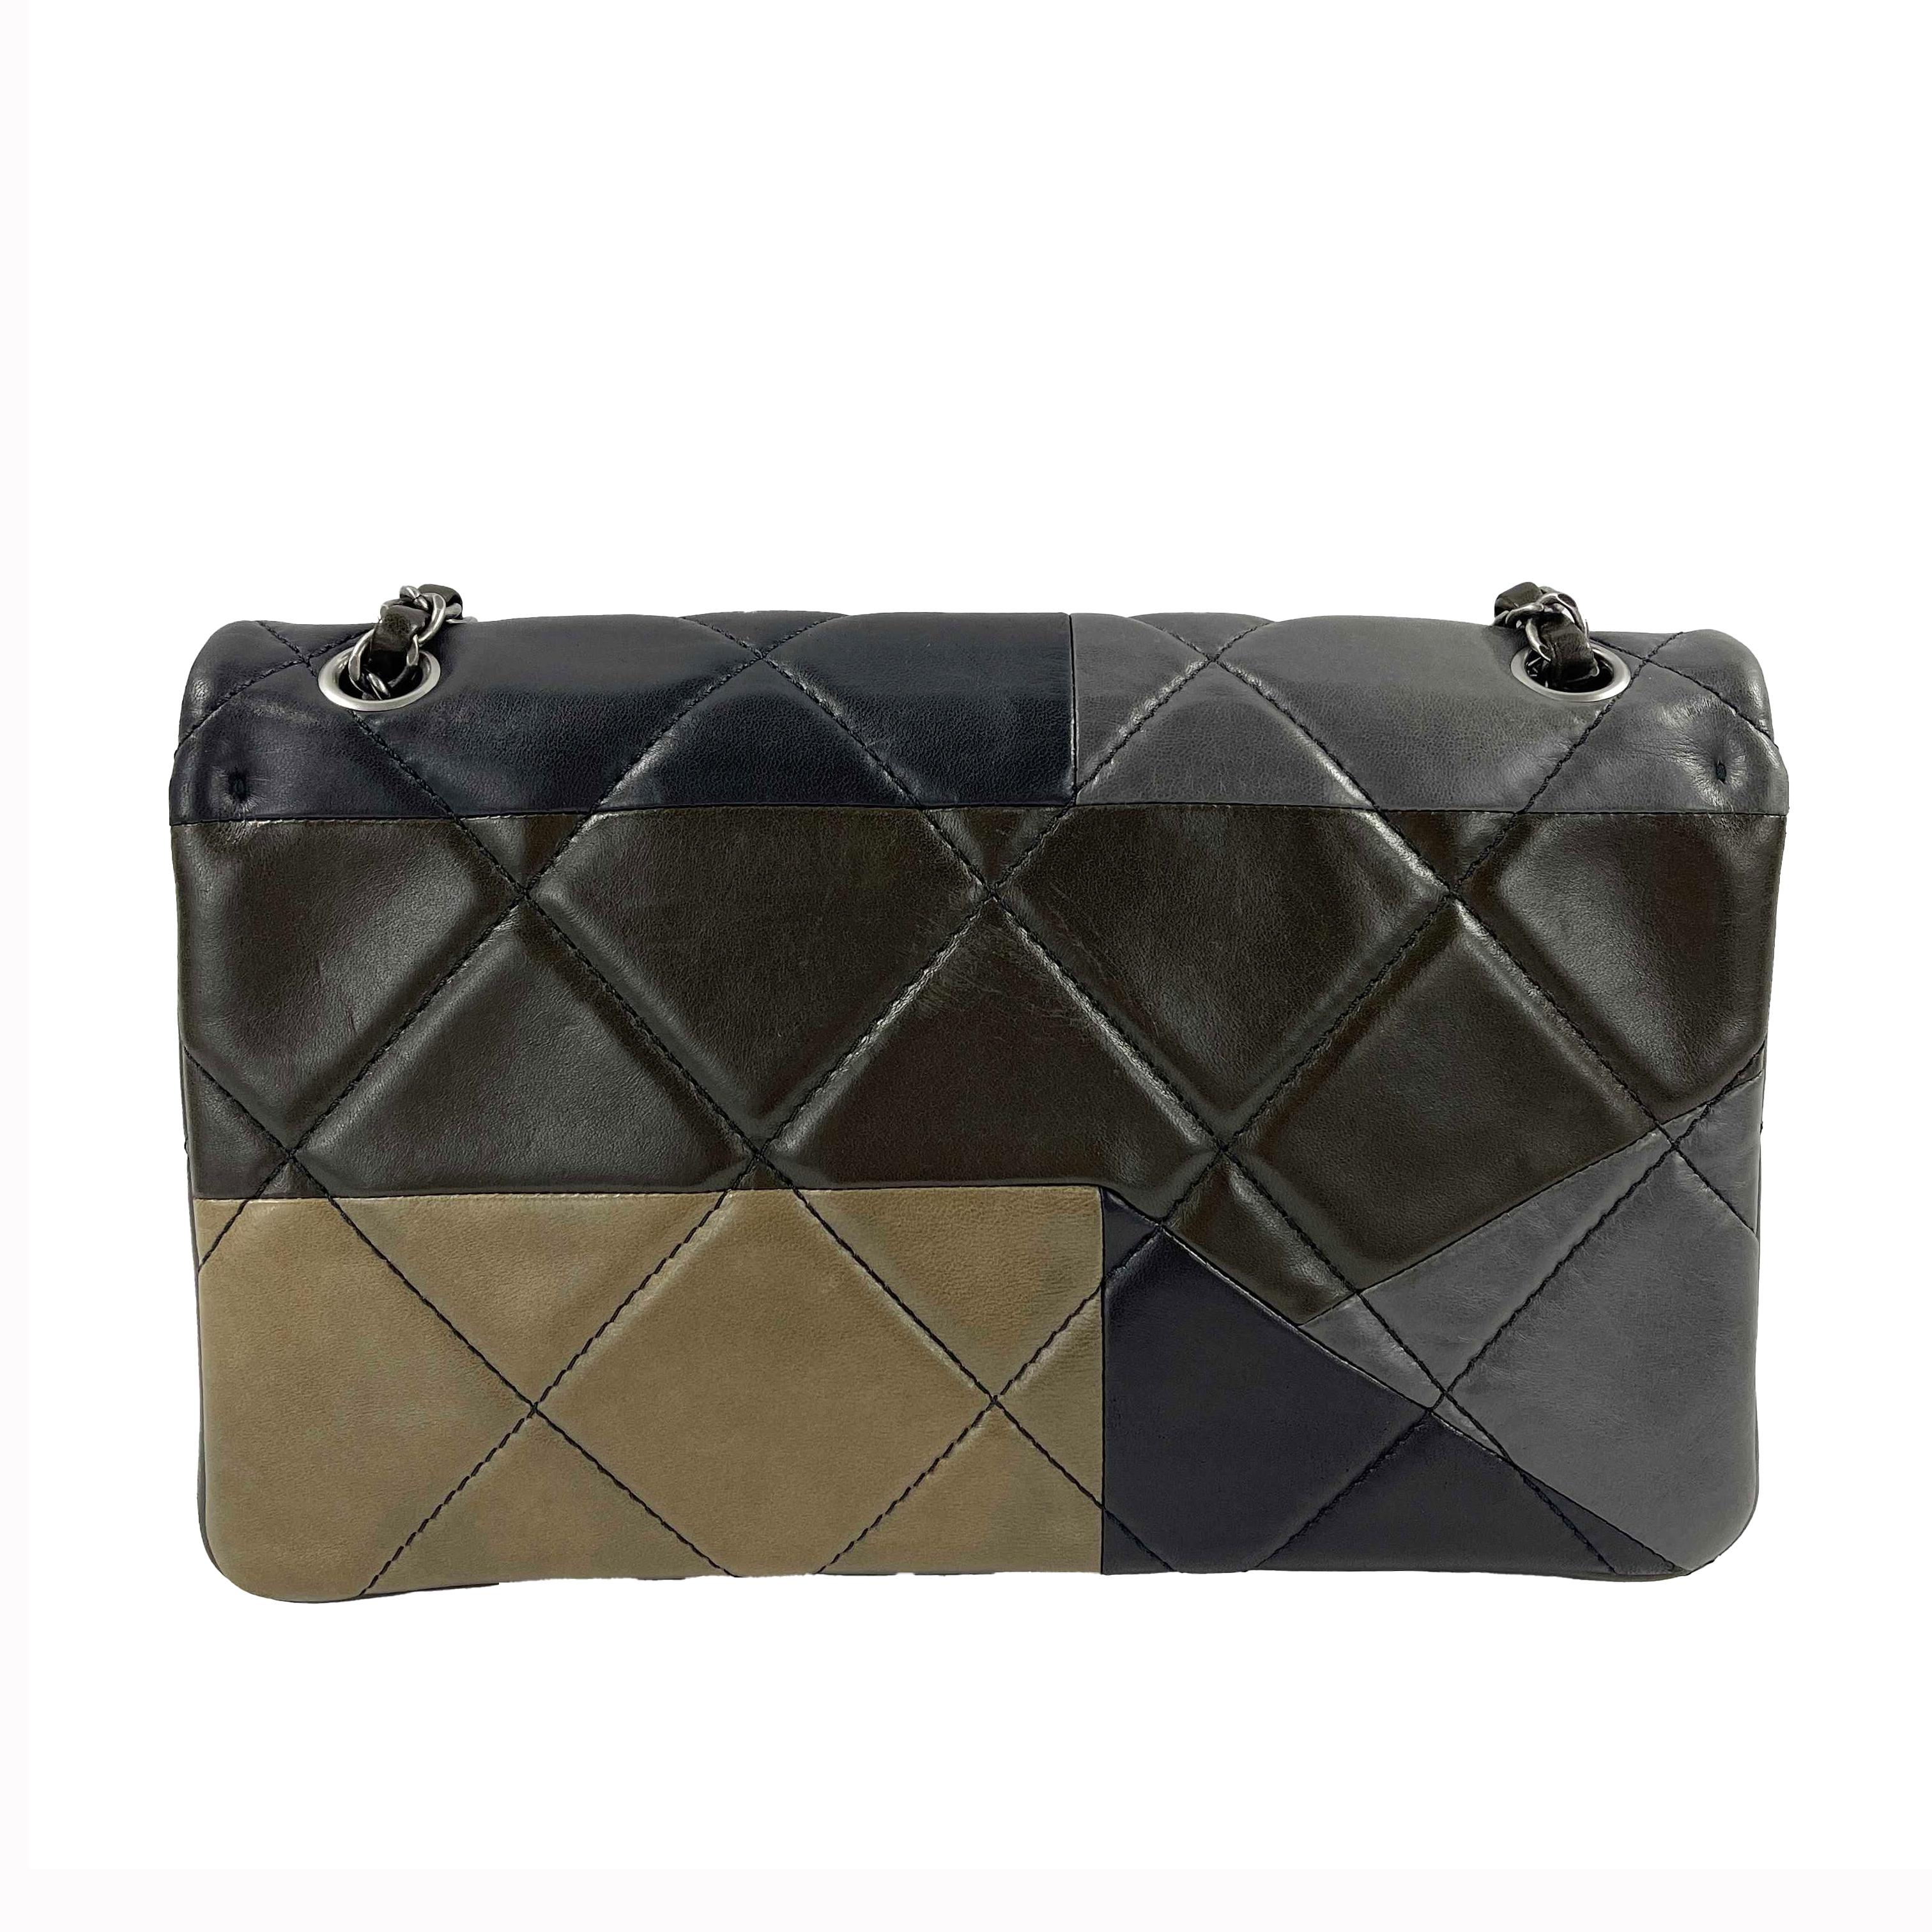 CHANEL - Excellent - Boy Bag Flap Quilted Patchwork Medium Shoulder Crossbody - Multi -Olive Green, Brown and Grey - Handbag

Description

This handbag is crafted in earth tones with multicolor patchwork style diamond quilted lambskin